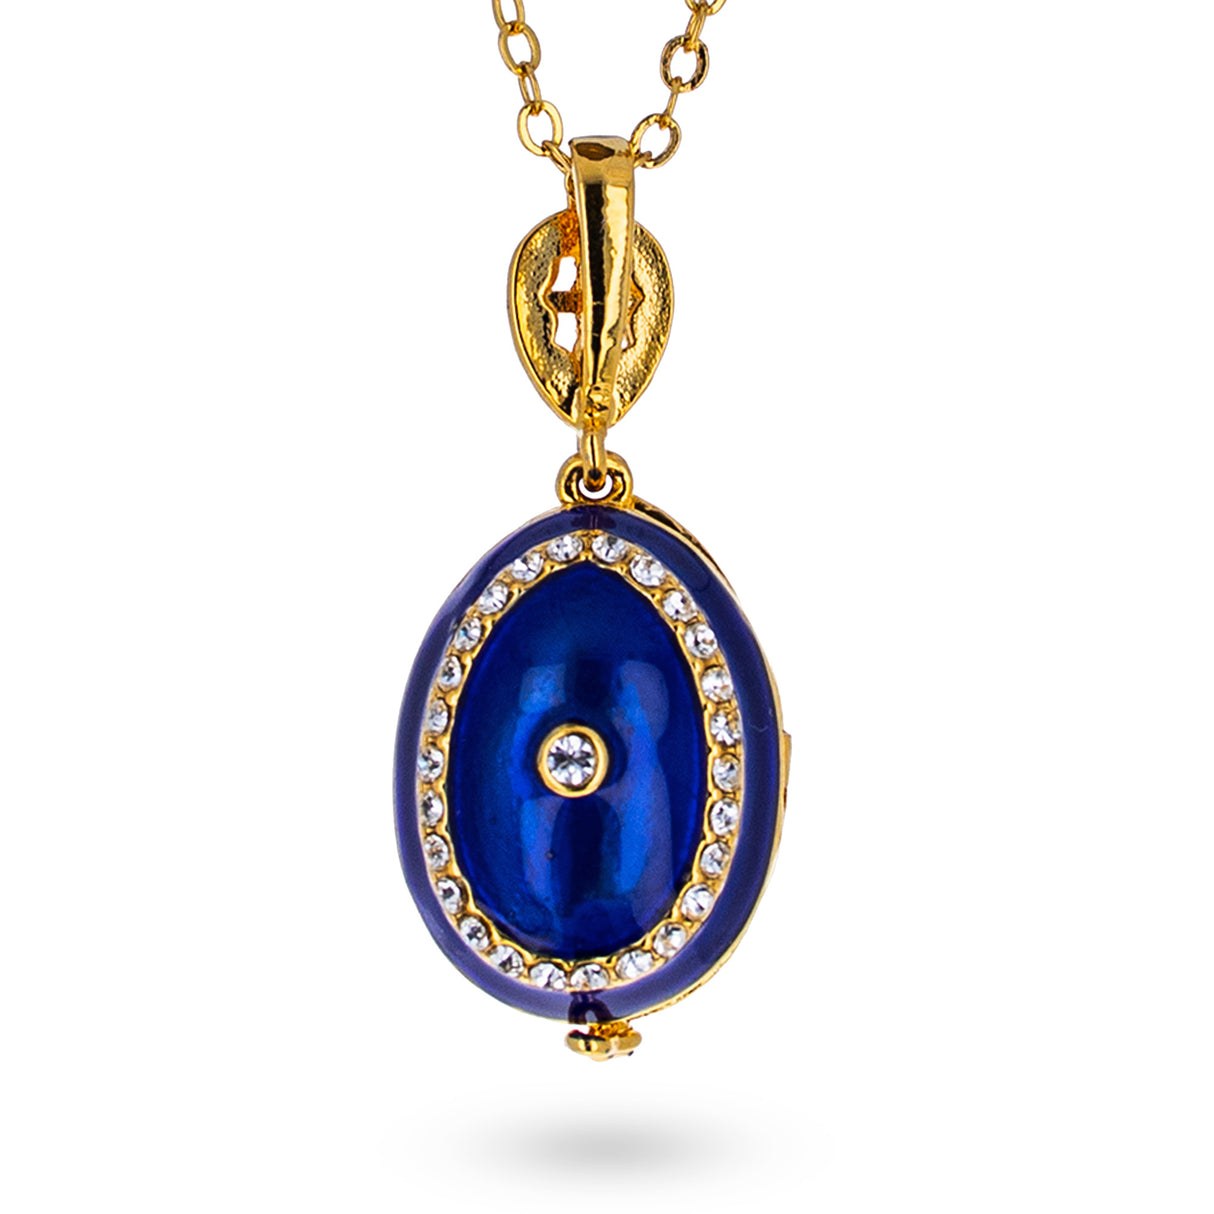 Blue Brass 50 Crystals Triptych Icons Royal Egg Pendant Necklace ,dimensions in inches: 1.04 x 20 x 0.7